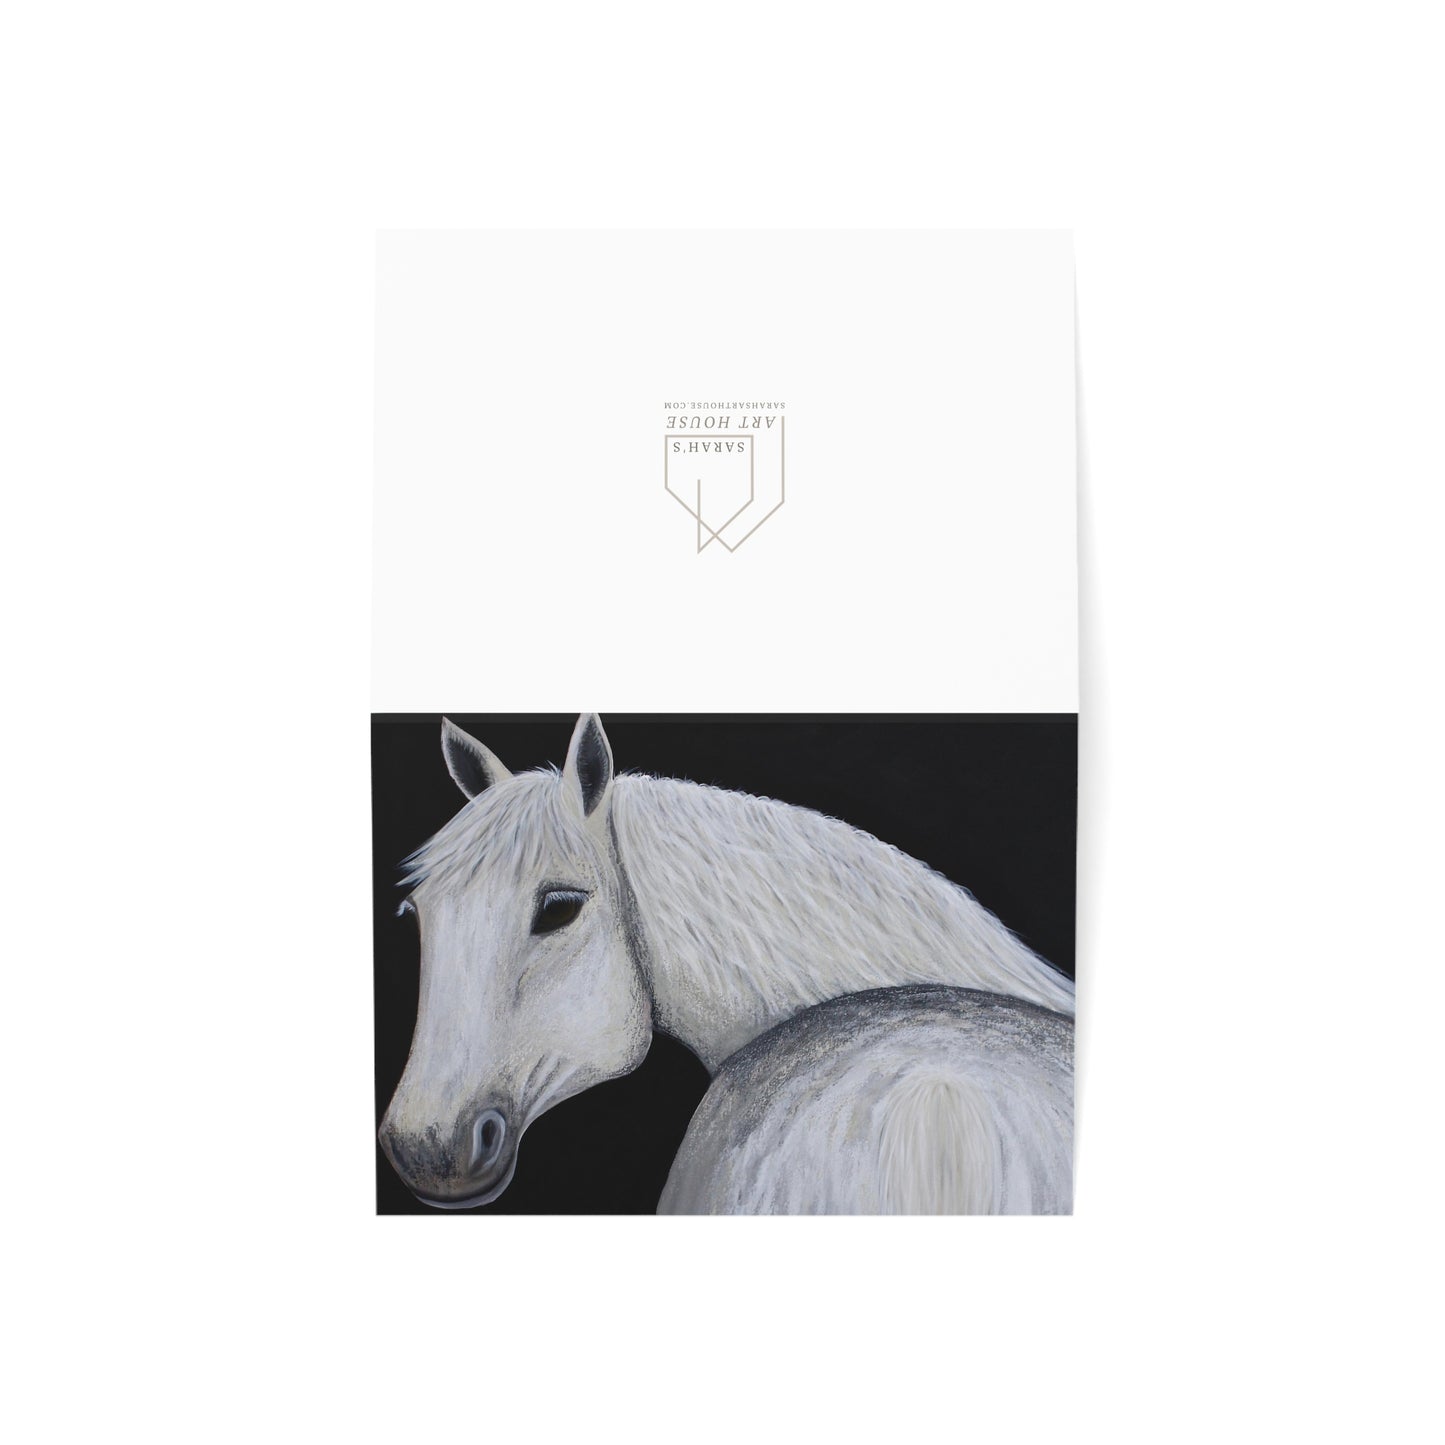 Ghost - Equestrian Greeting Cards - Horse Greeting Card - Stamina 1, 10, 20, & 50 pieces